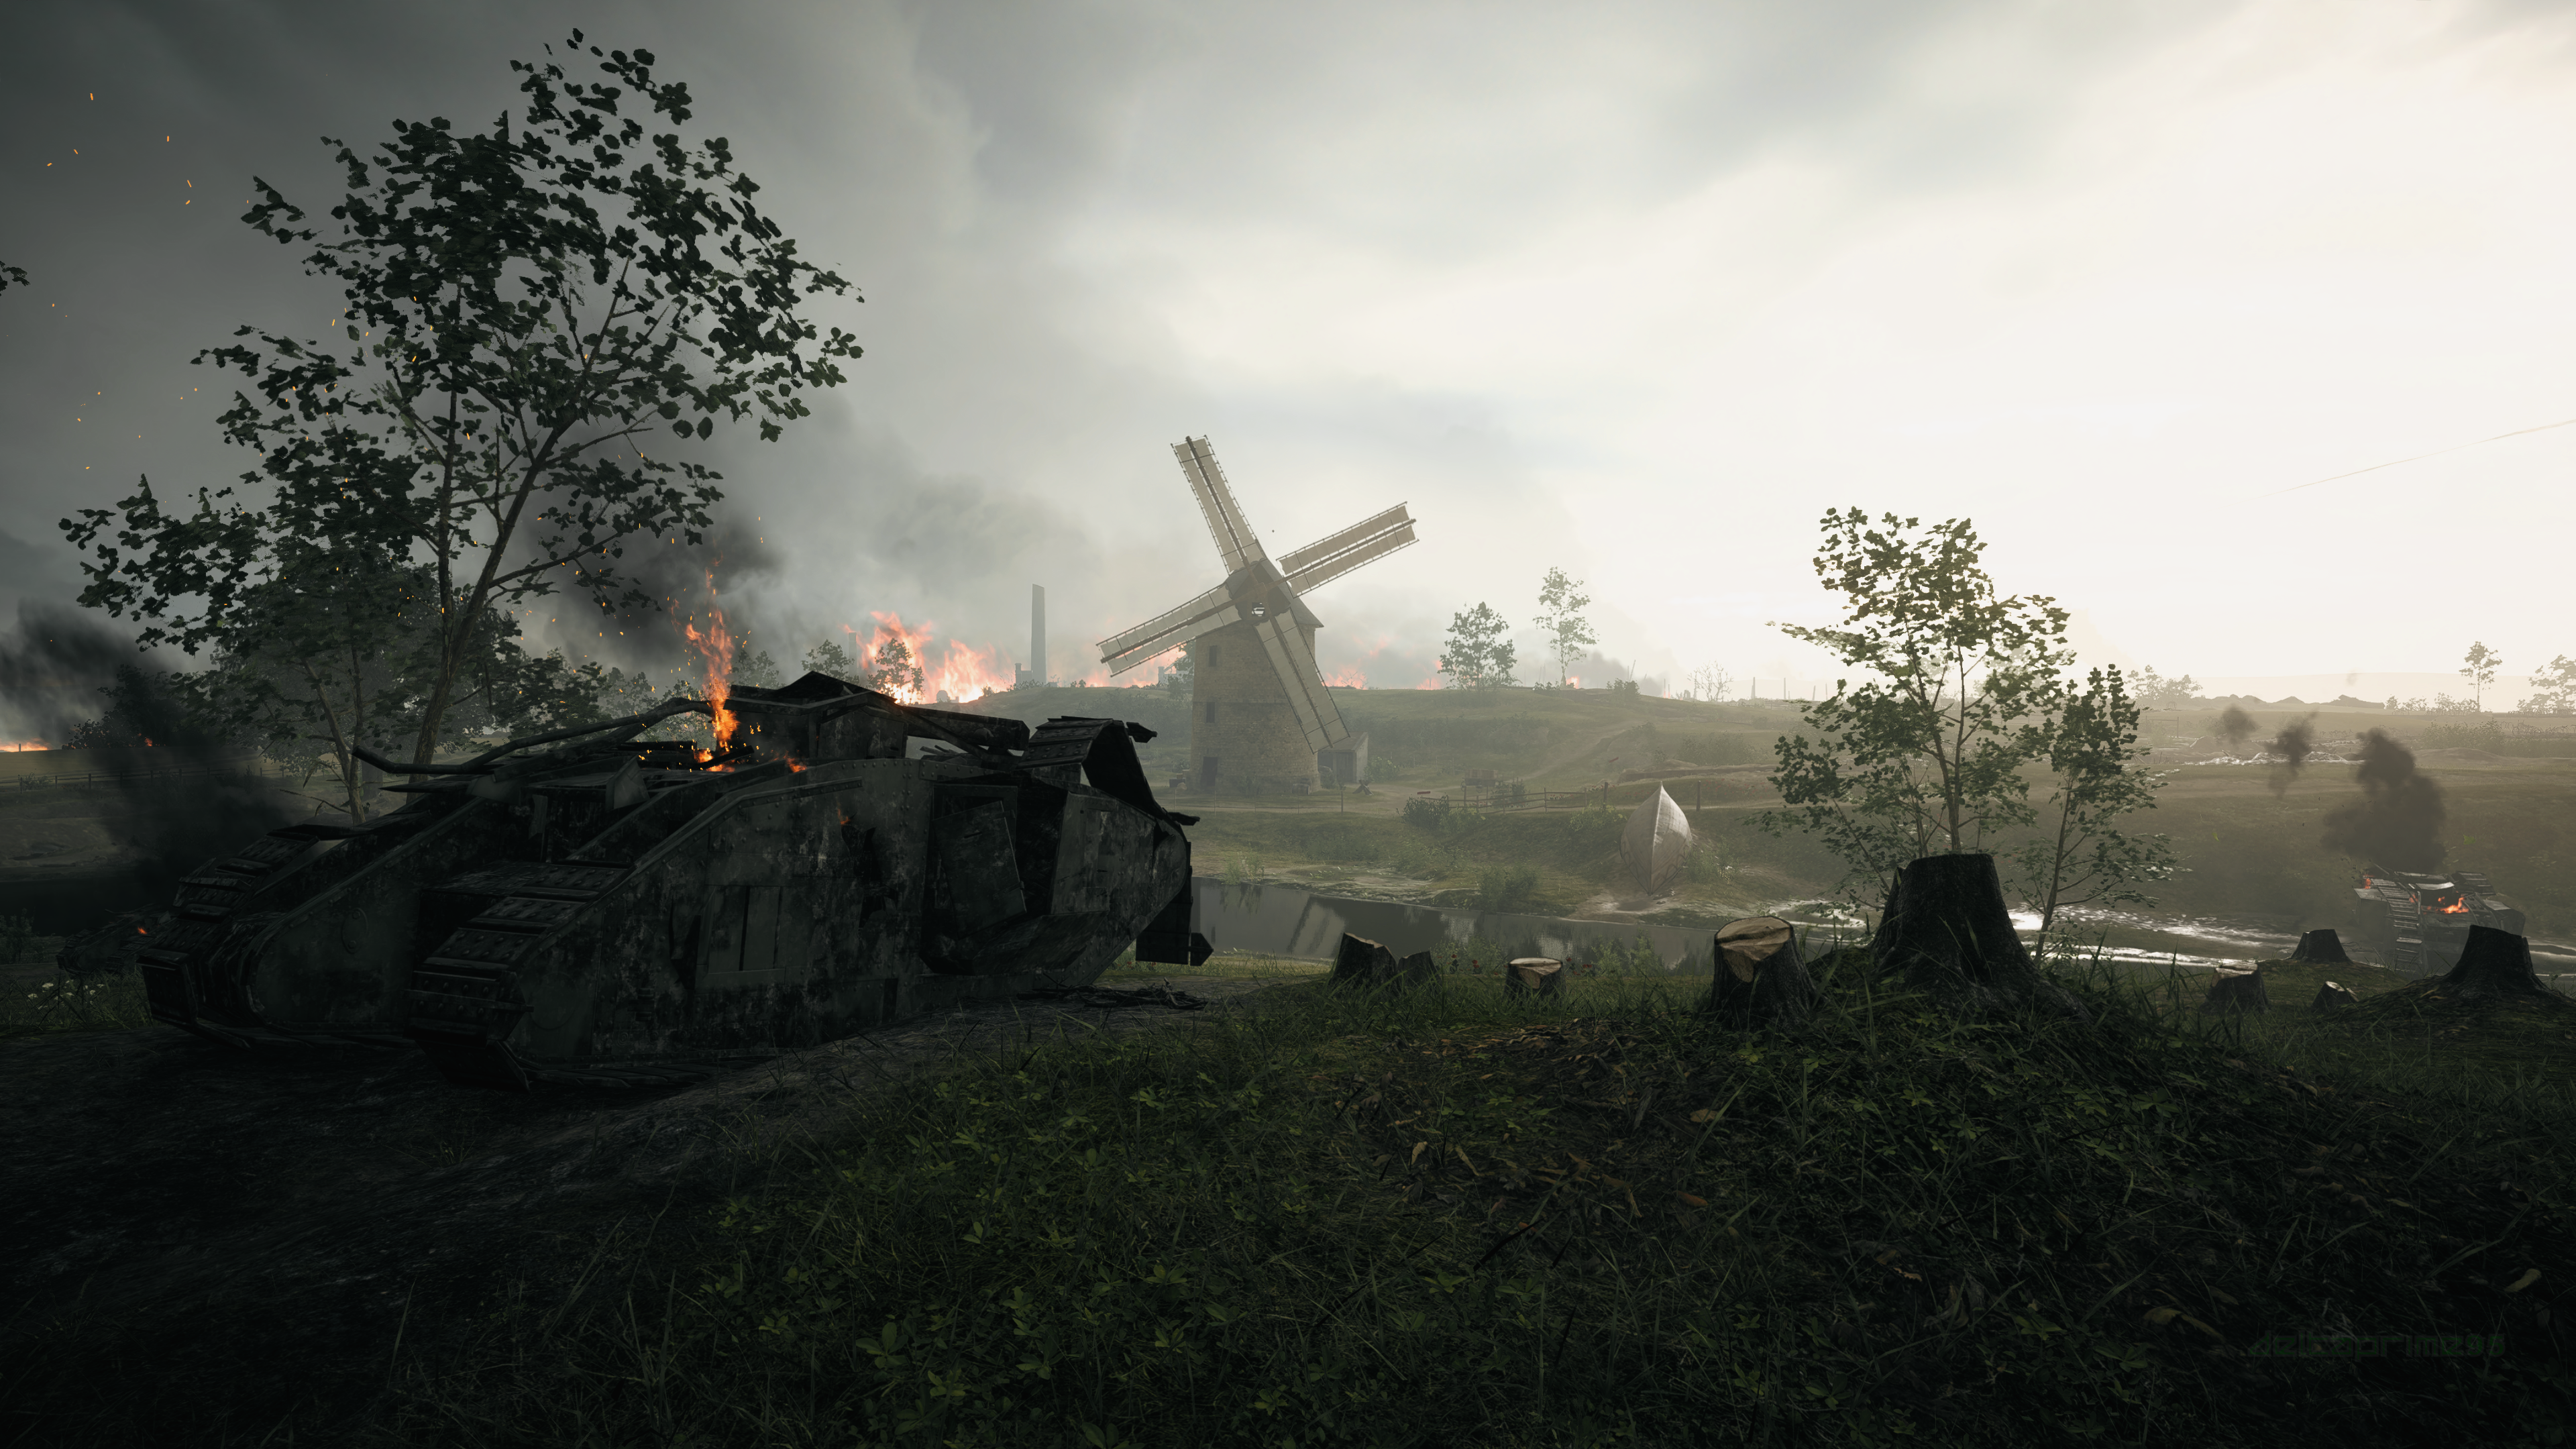 4K, In Game, PC Gaming, Mark I, Tank, River Somme, Screen Shot, France, Fire, Windmill, Destruction, Overcast, Field, Trenches, World War I, Battlefield British HD Wallpaper